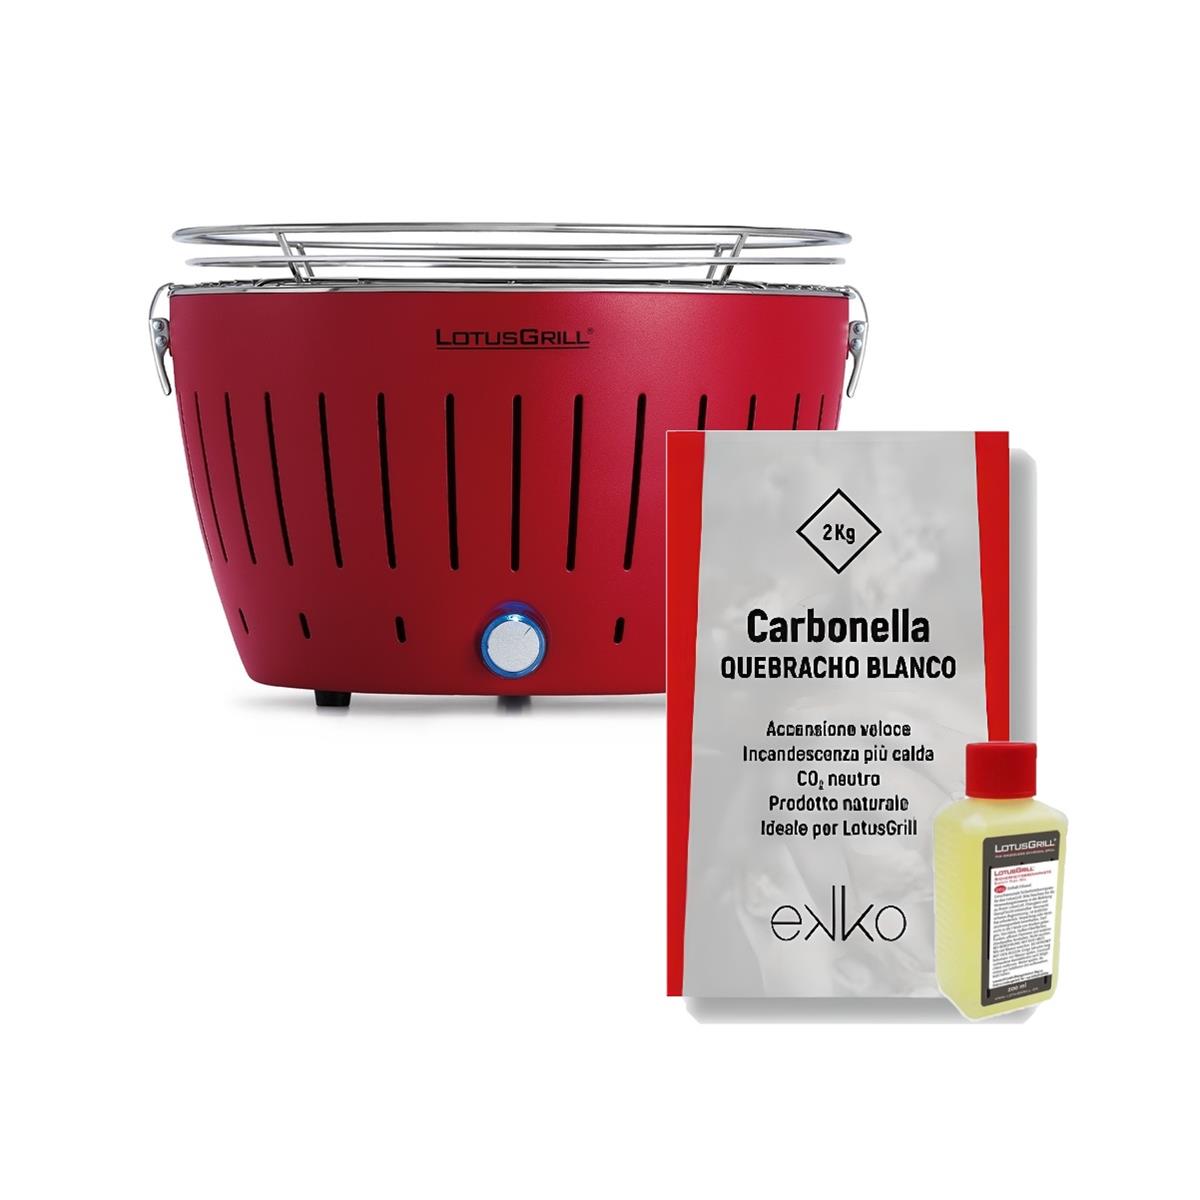 LotusGrill - Barbecue LG G34 U Red + 200 ml ignition gel and Quebracho Blanco charcoal 2 k